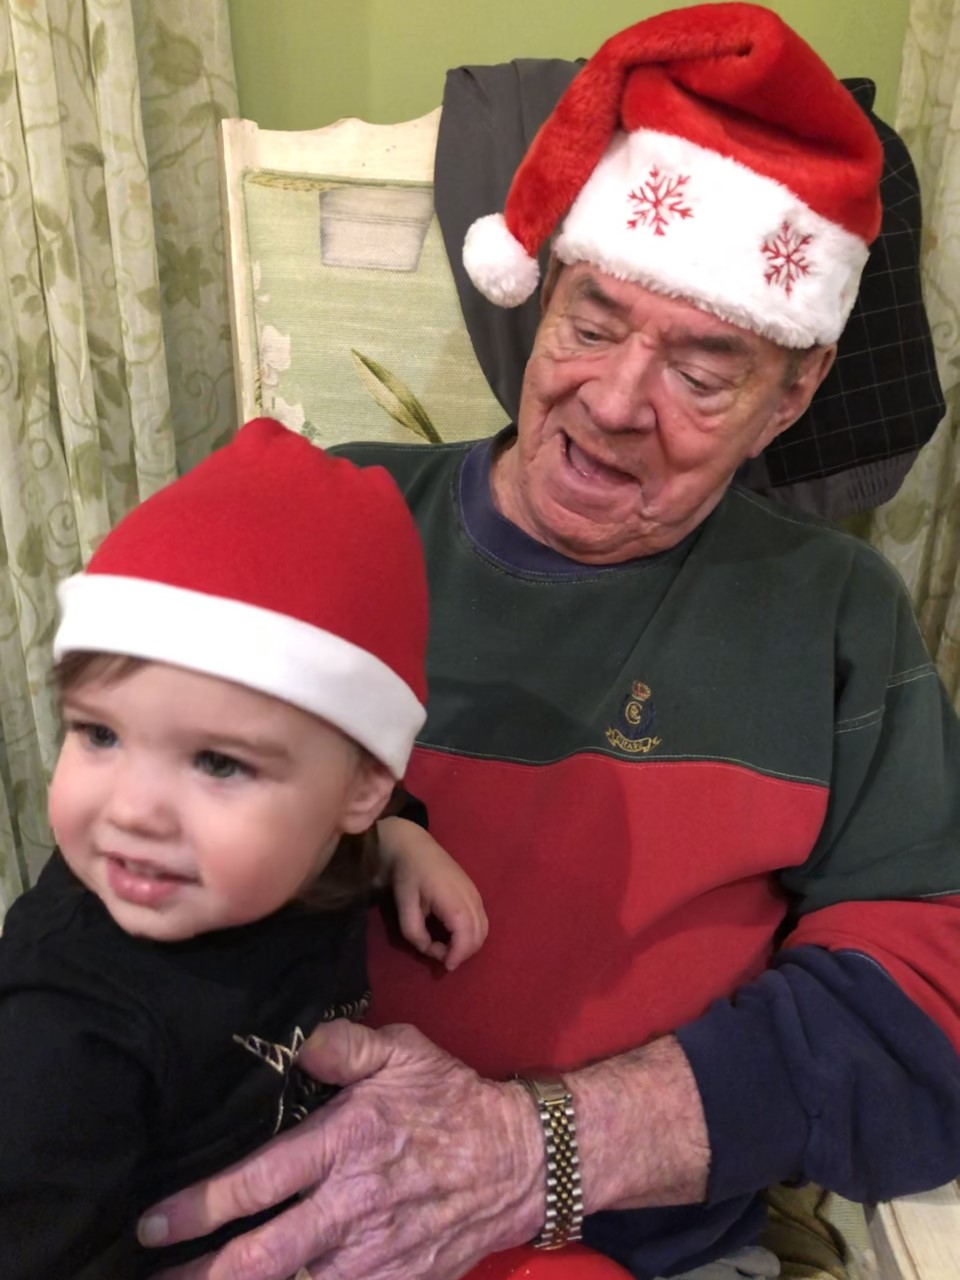 Jack Murphy celebrates a pre-COVID-19 Christmas with his great-granddaughter, Violet.